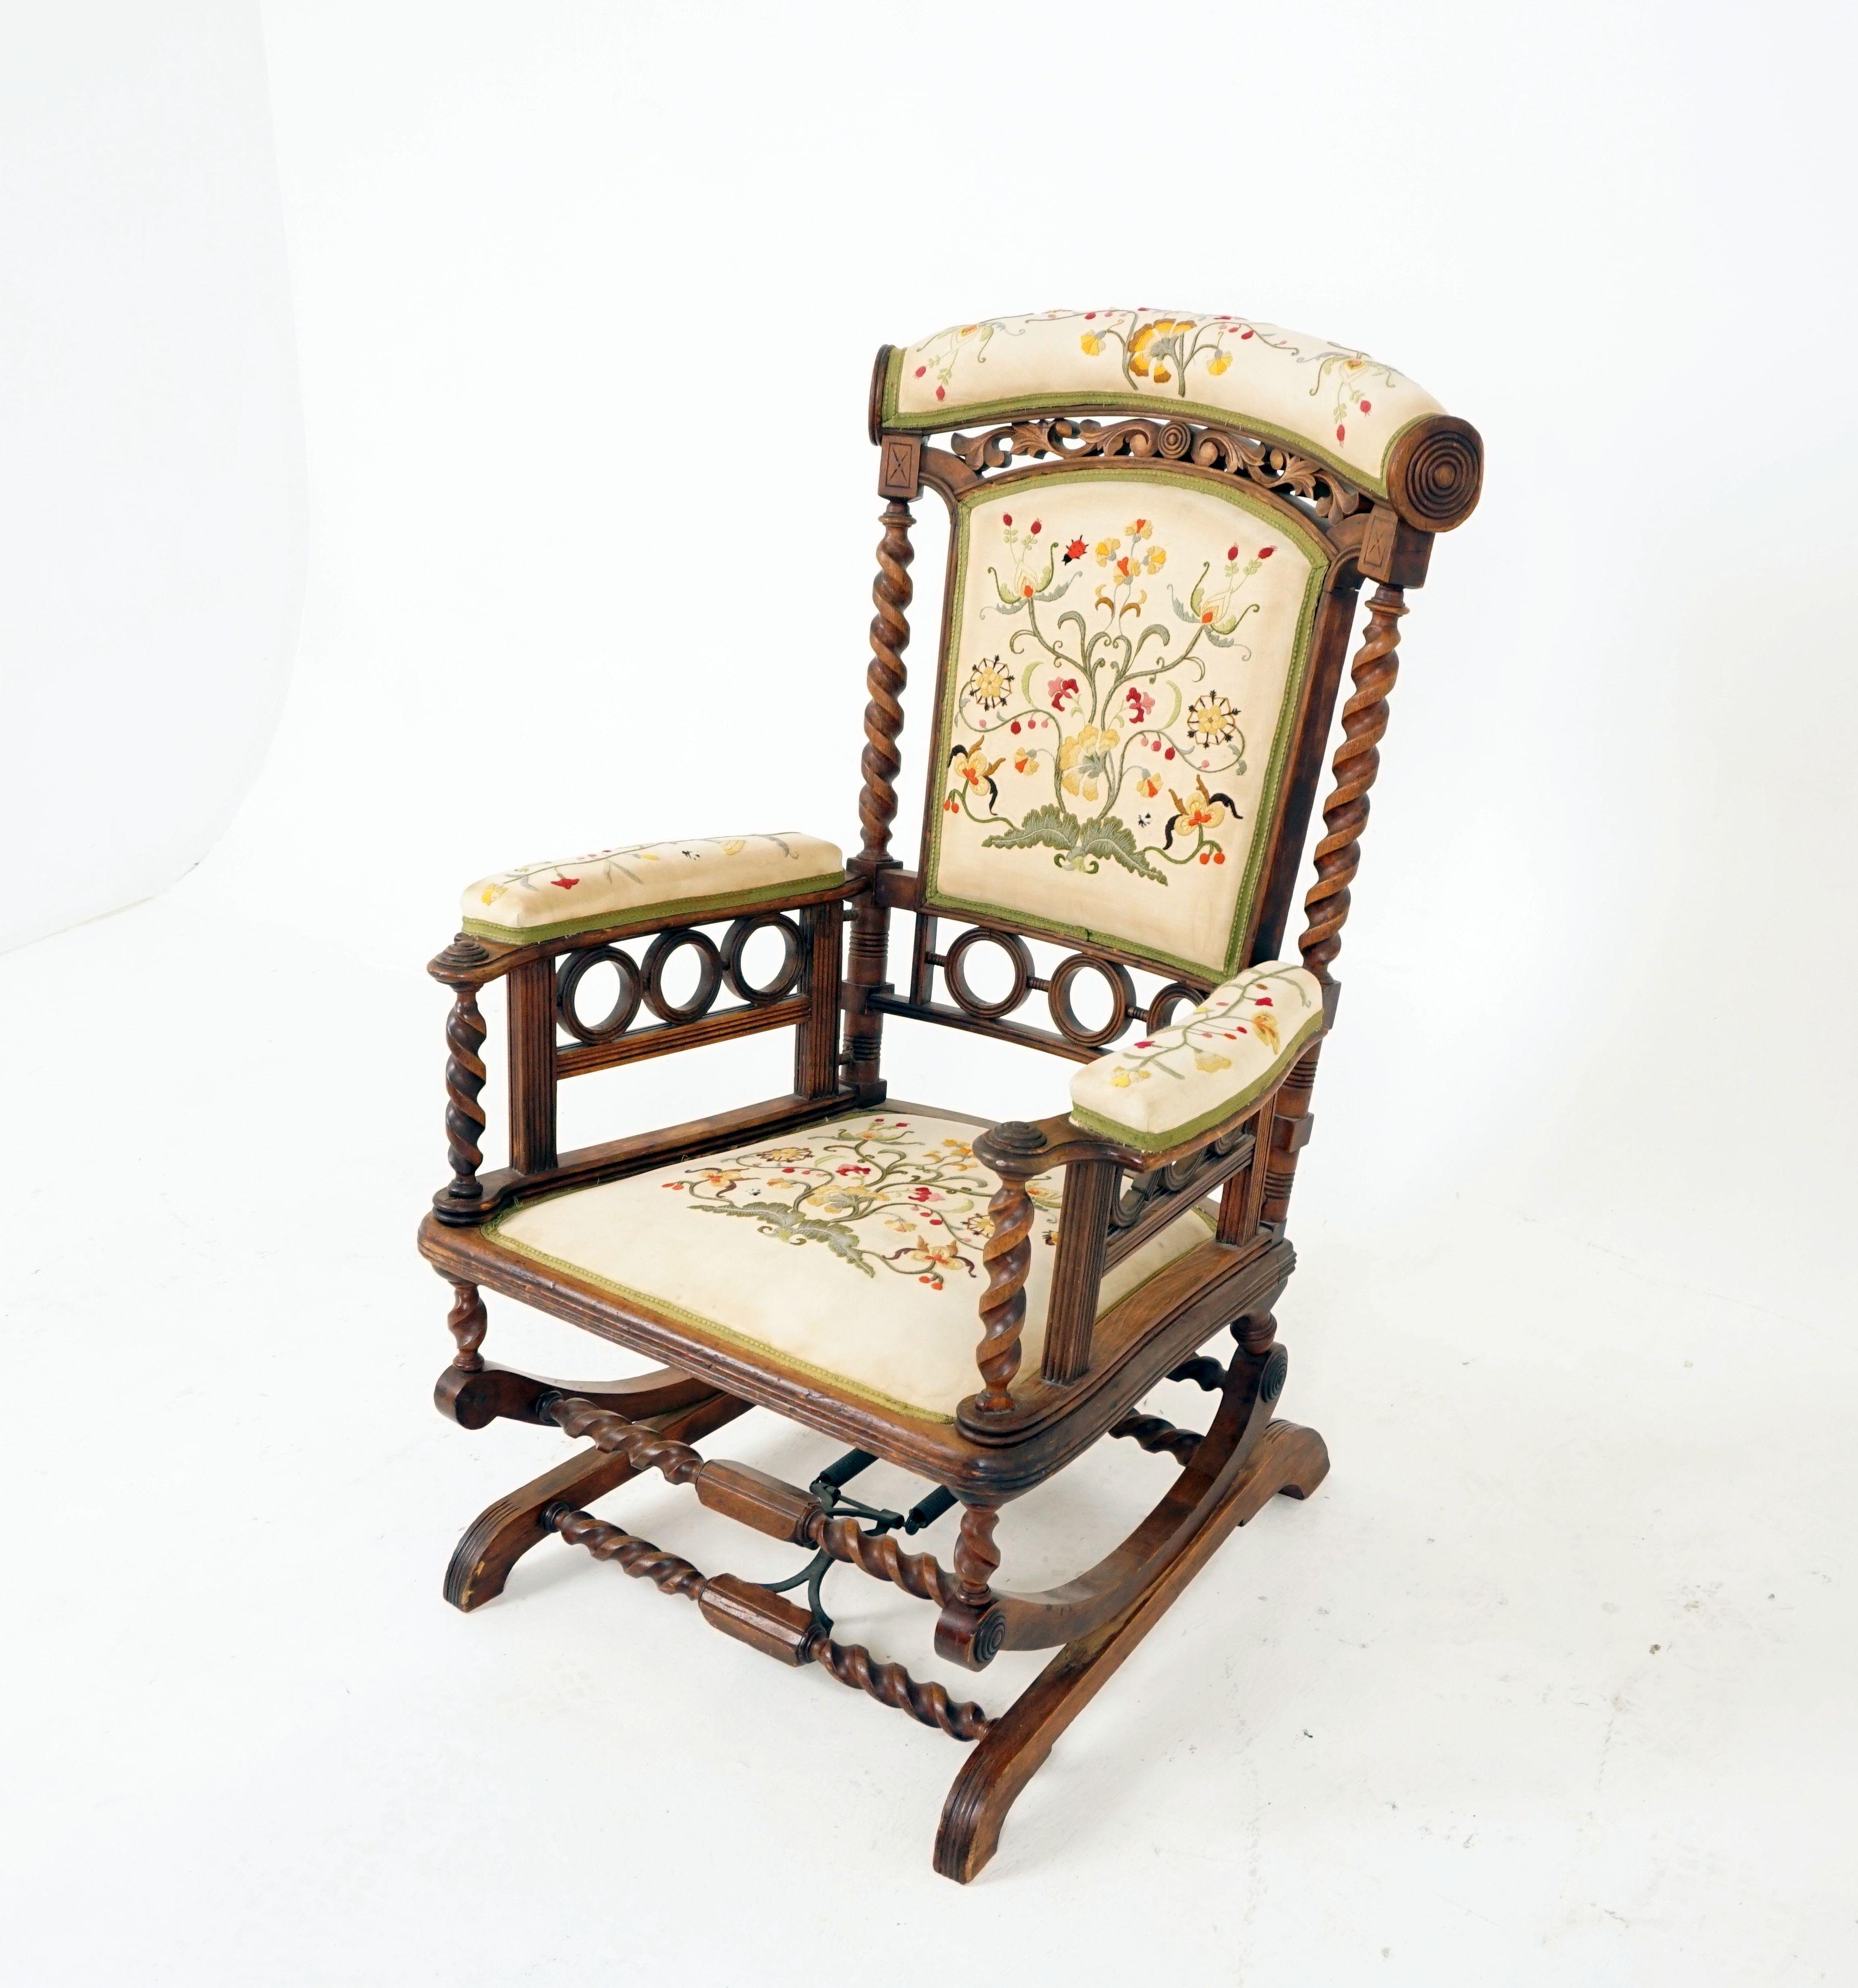 Antique rocking chair, walnut, Barley Twist, George Hunzinger, American 1880, B2537

America 1880
Solid walnut
Original finish
Shaped padded top with ringette's on the ends
Carved frieze underneath
Padded back with carved ringette's